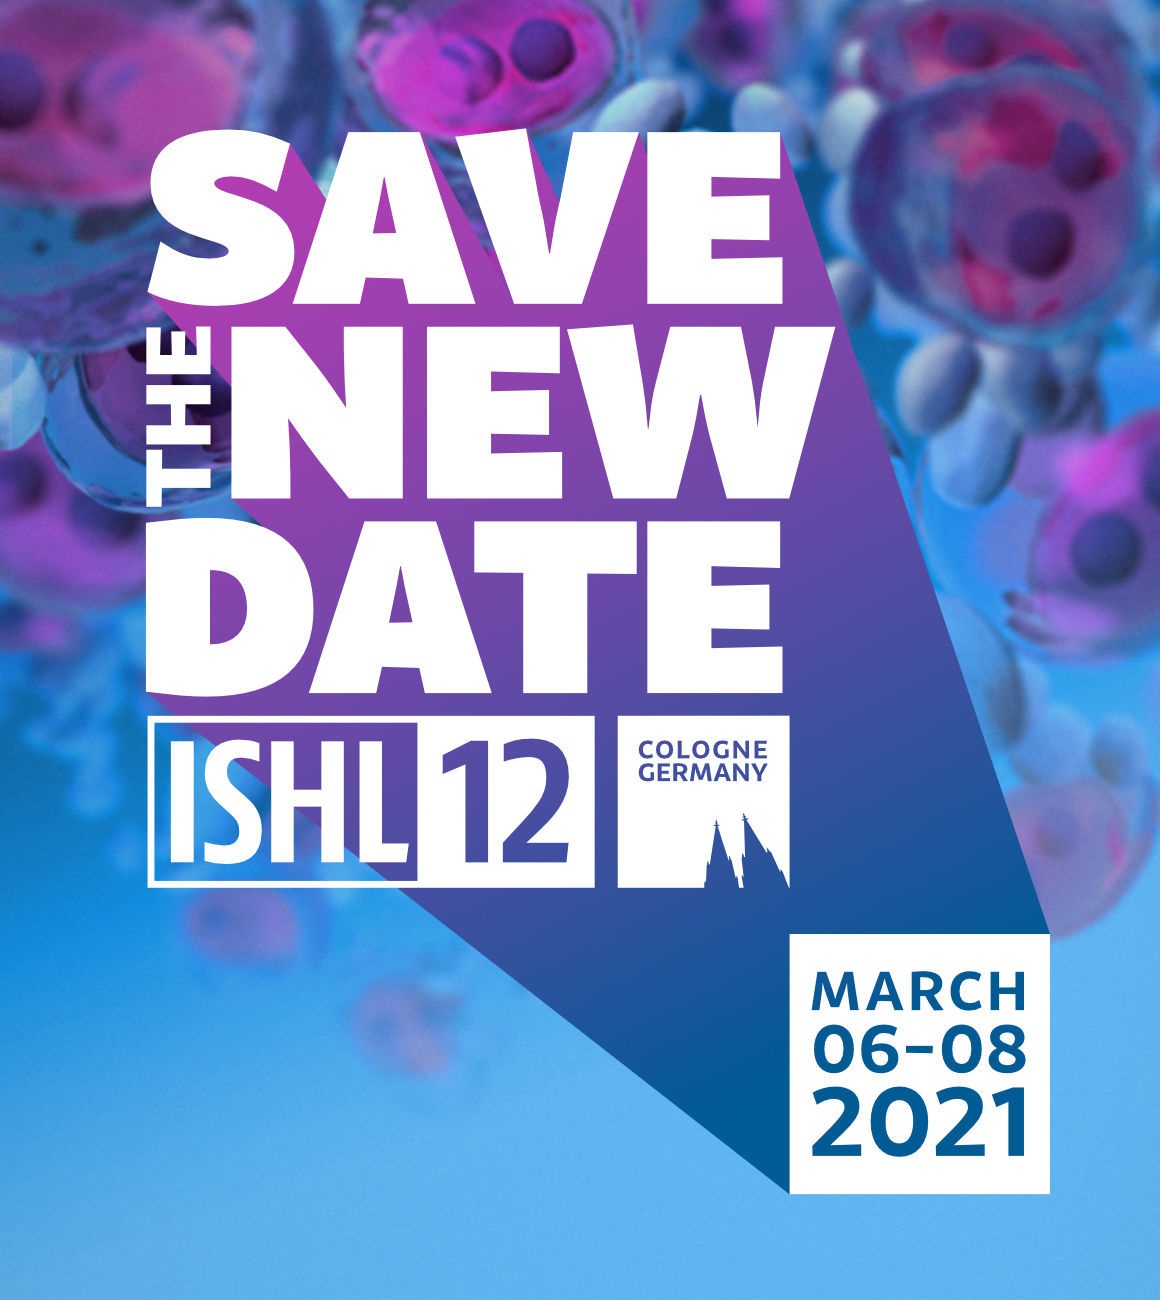 ISHL12 - Postponed to March 2021